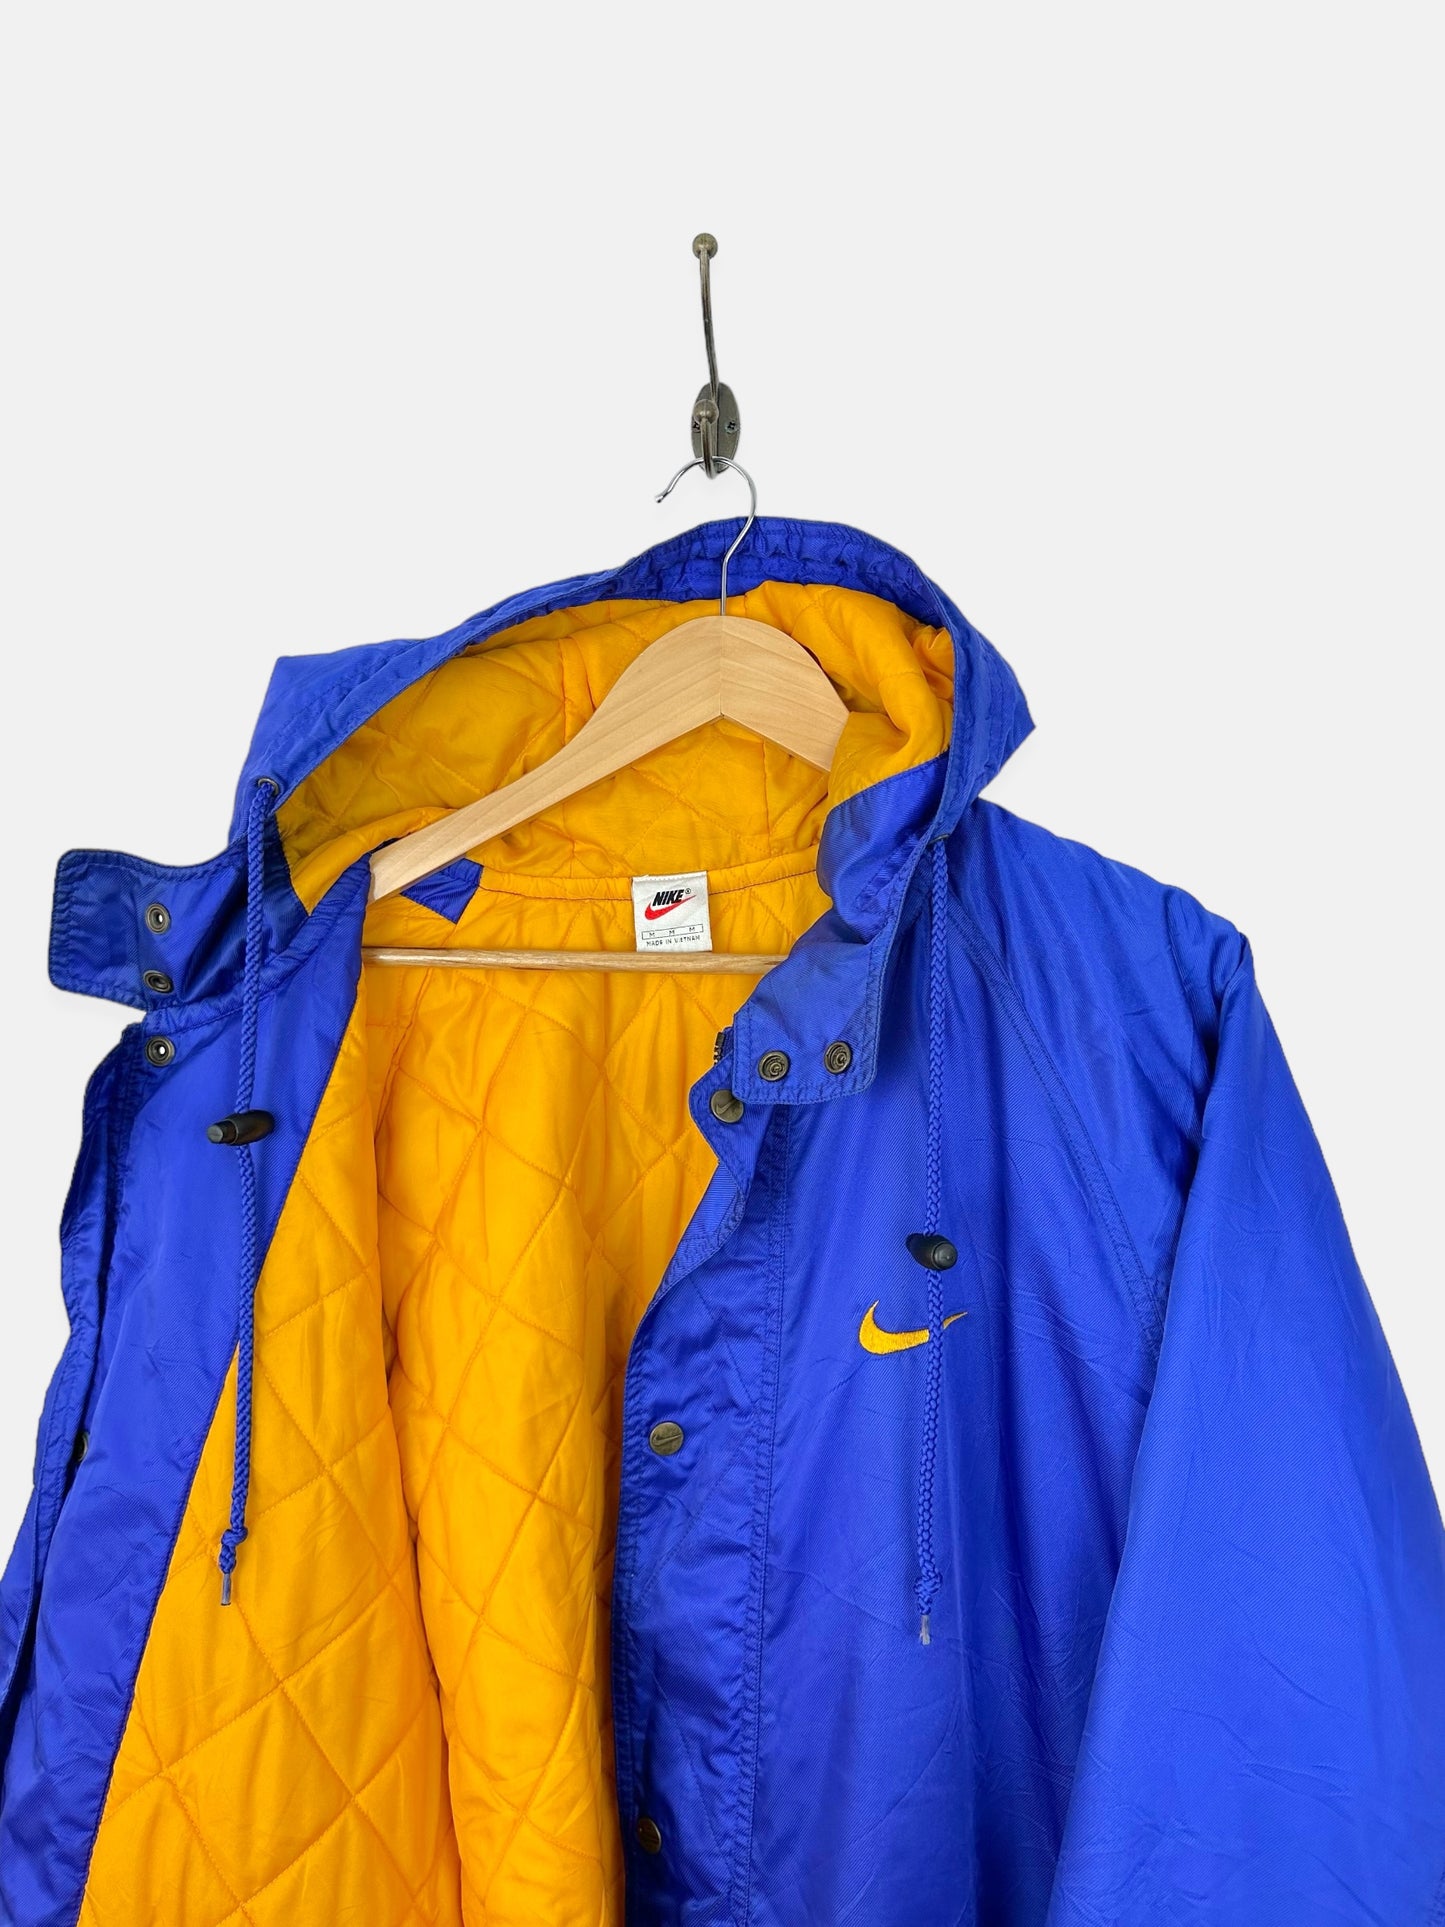 90's Nike Embroidered Vintage Jacket with Hood Size XL